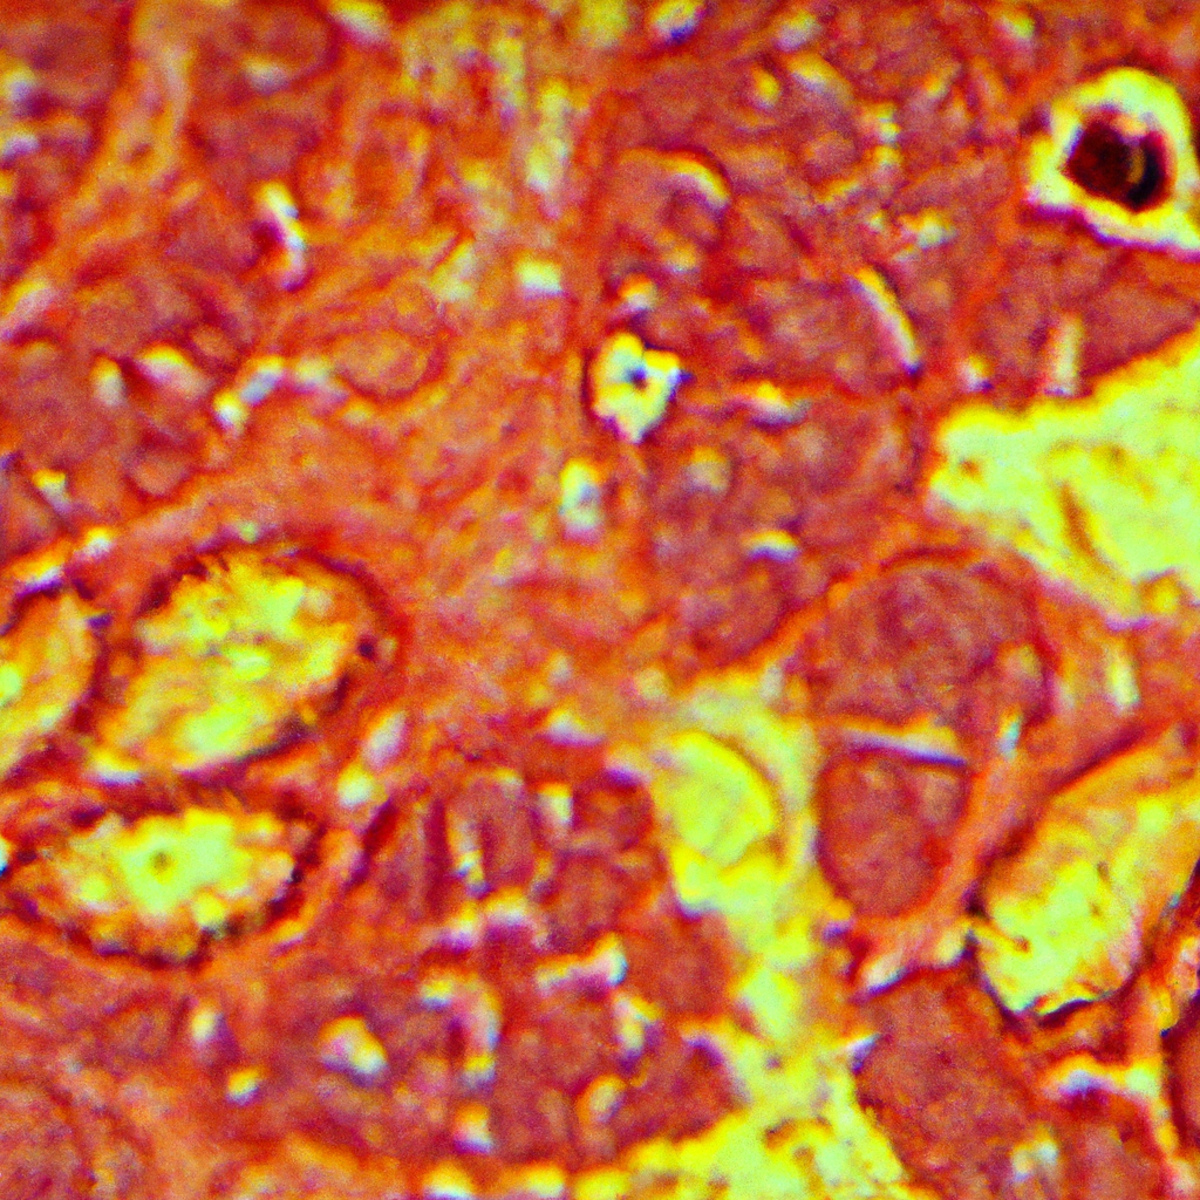 Close-up view of inflamed gallbladder specimen with yellow nodules and granulomatous formations, representing Xanthogranulomatous Cholecystitis.